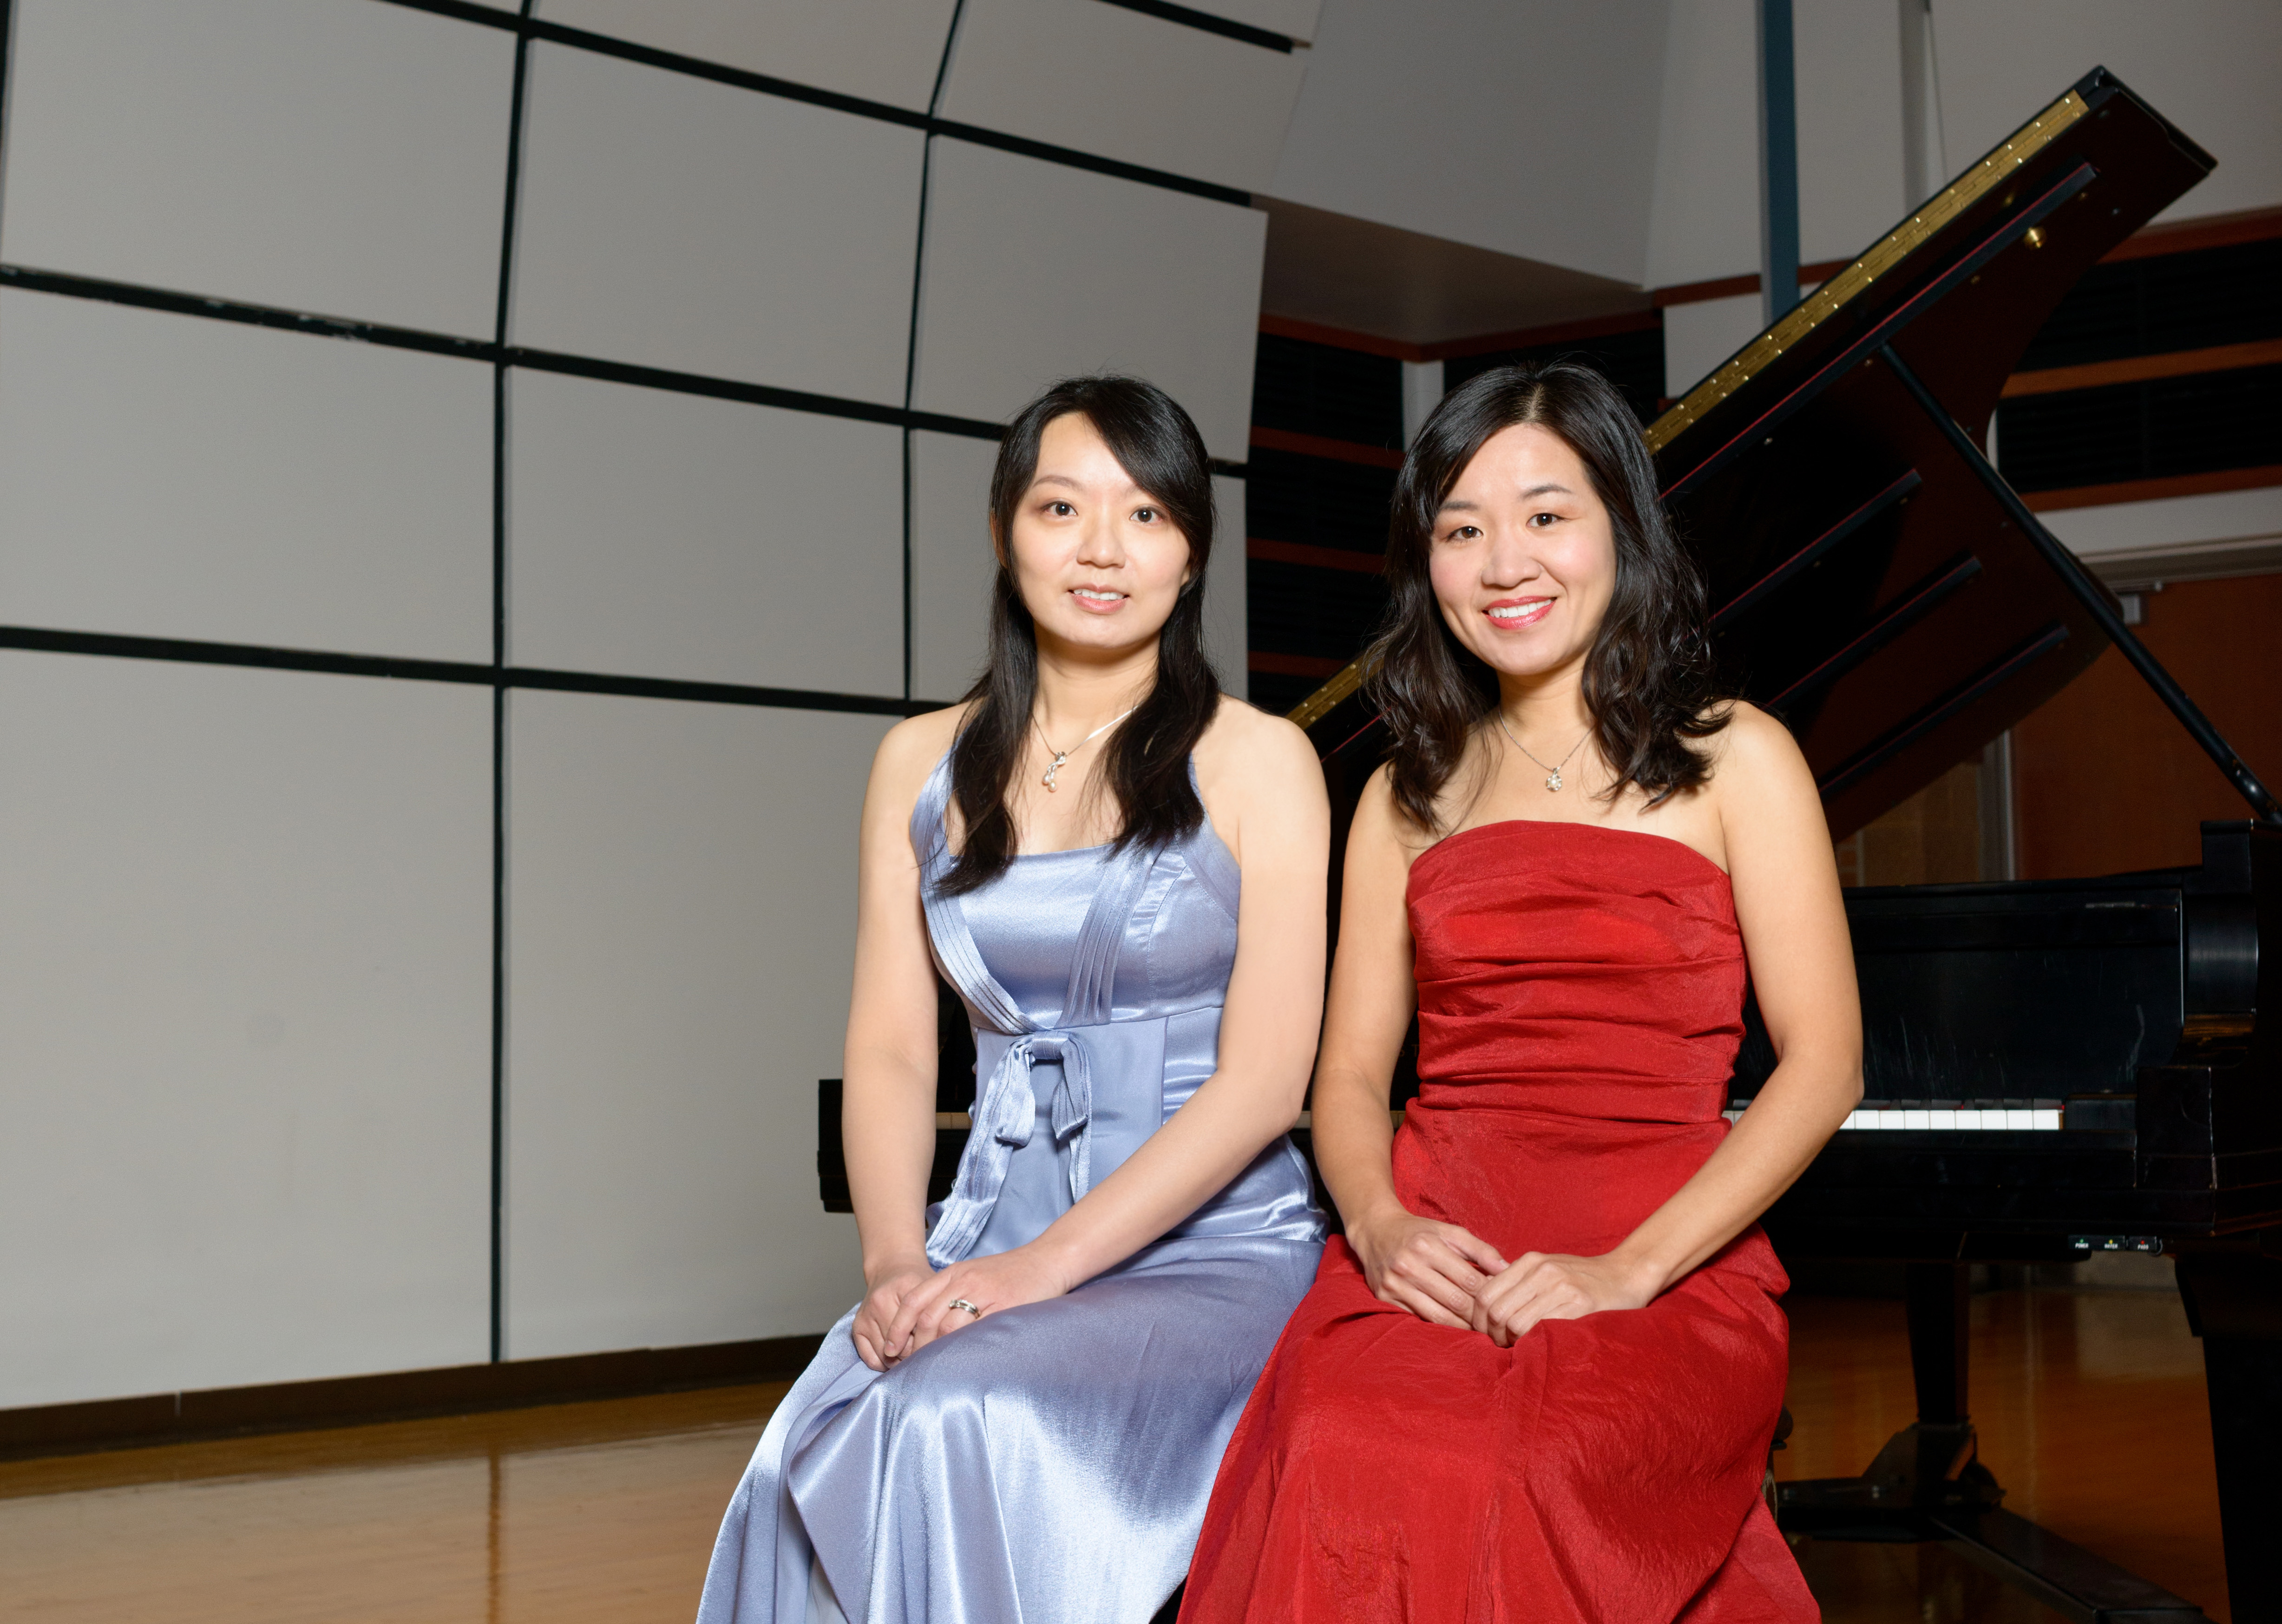 A photo of pianists Wendy Wan-Hsing Chu and Yu-Hsuan Yang, who will be performing at an upcoming Guest Artist Recital event at KCC.